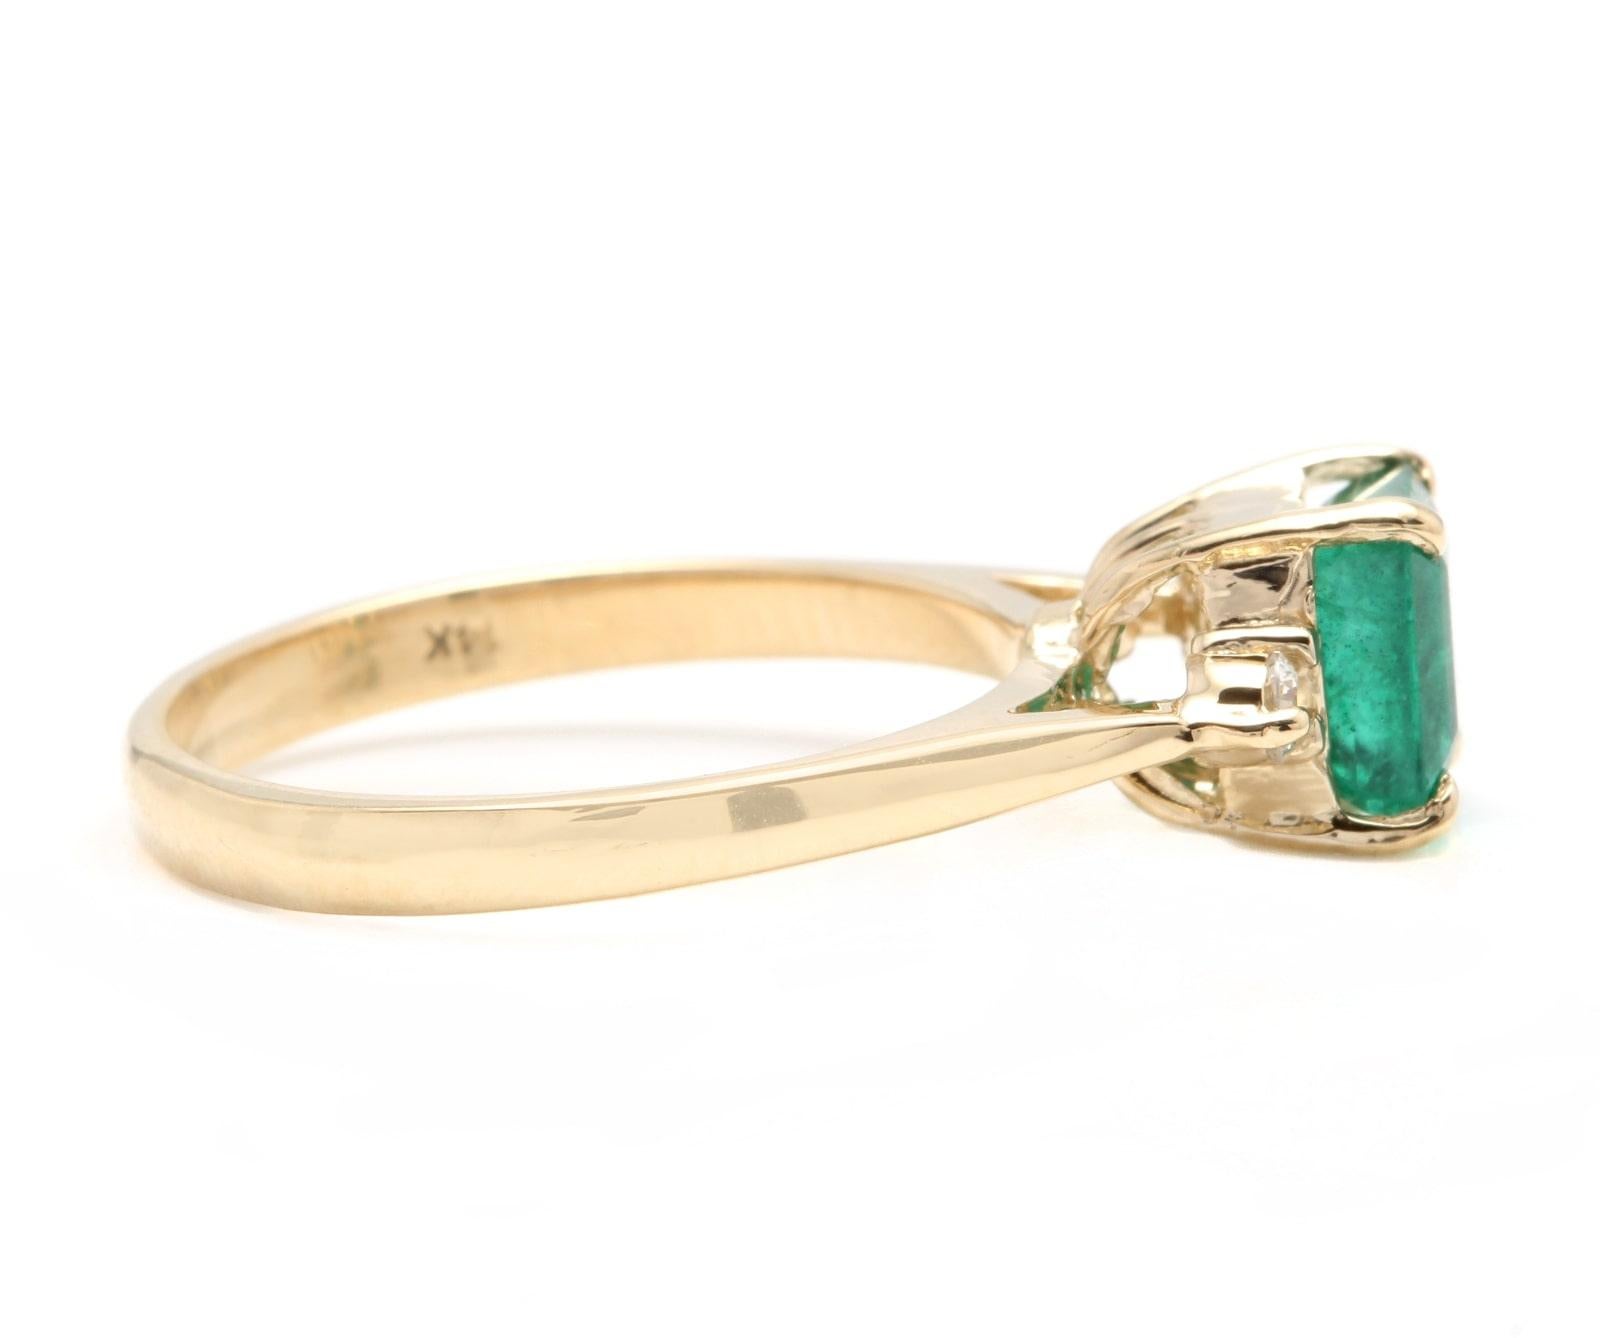 Emerald Cut 1.28 Carat Natural Emerald and Diamond 14 Karat Solid Yellow Gold Ring For Sale